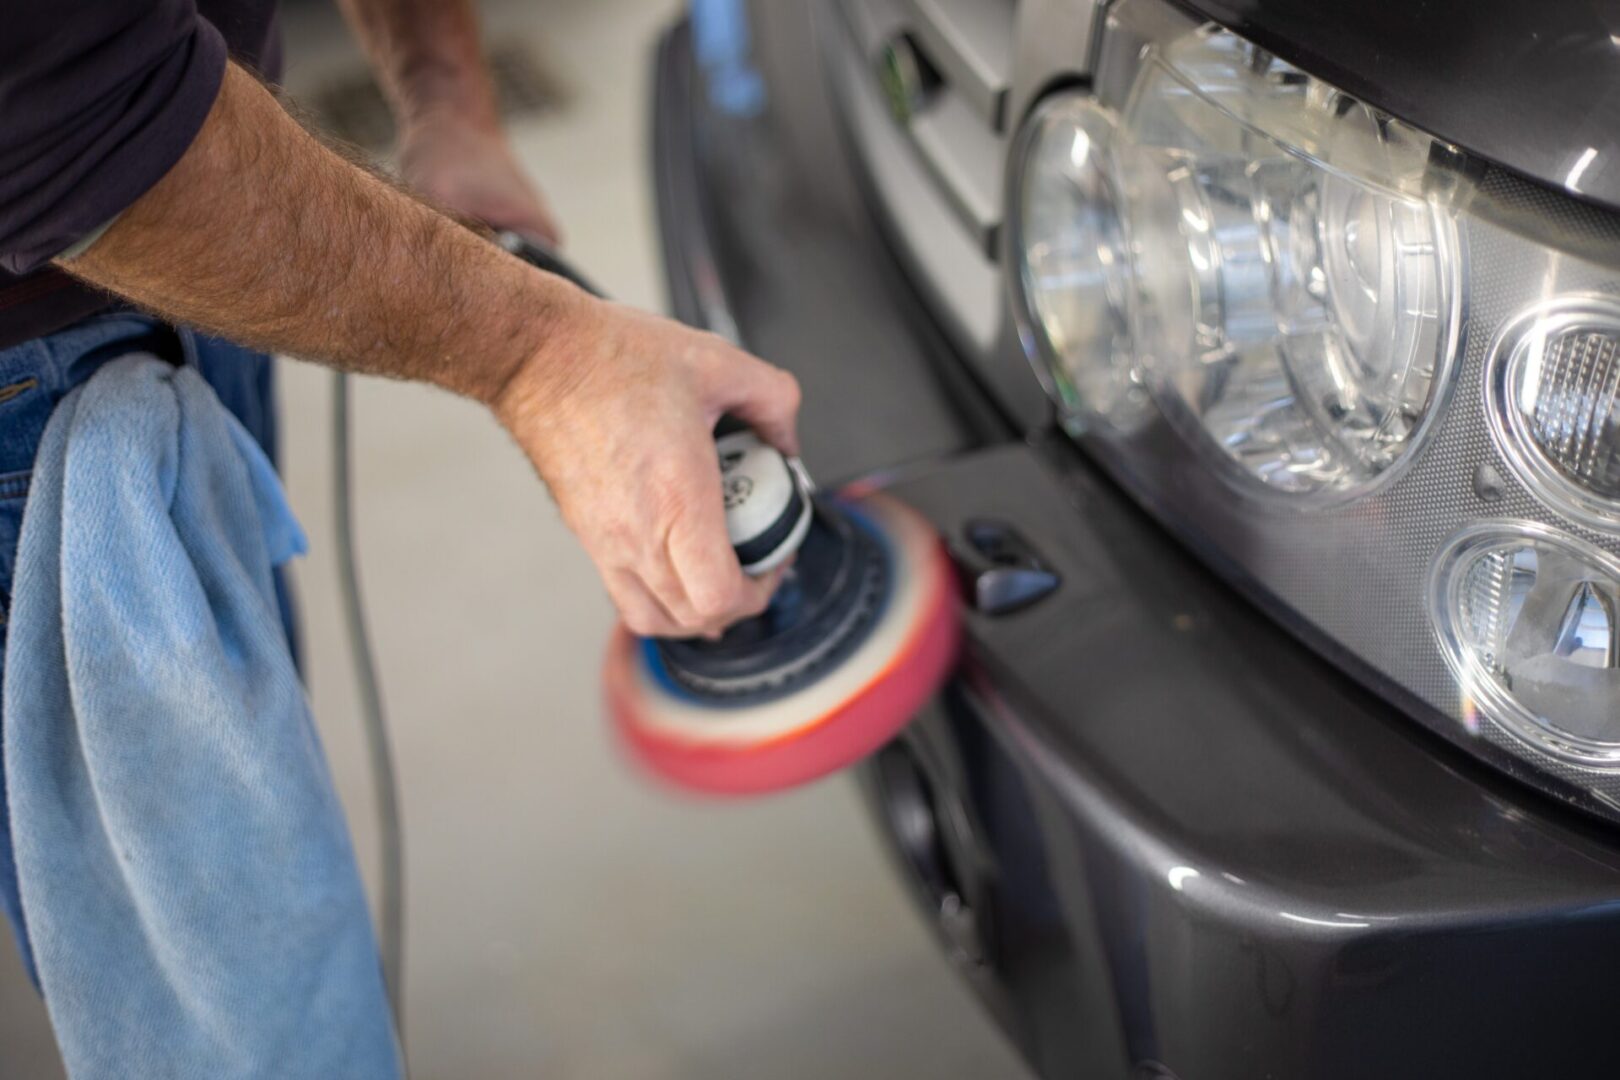 A person is using a polisher to clean the bumper of a car.